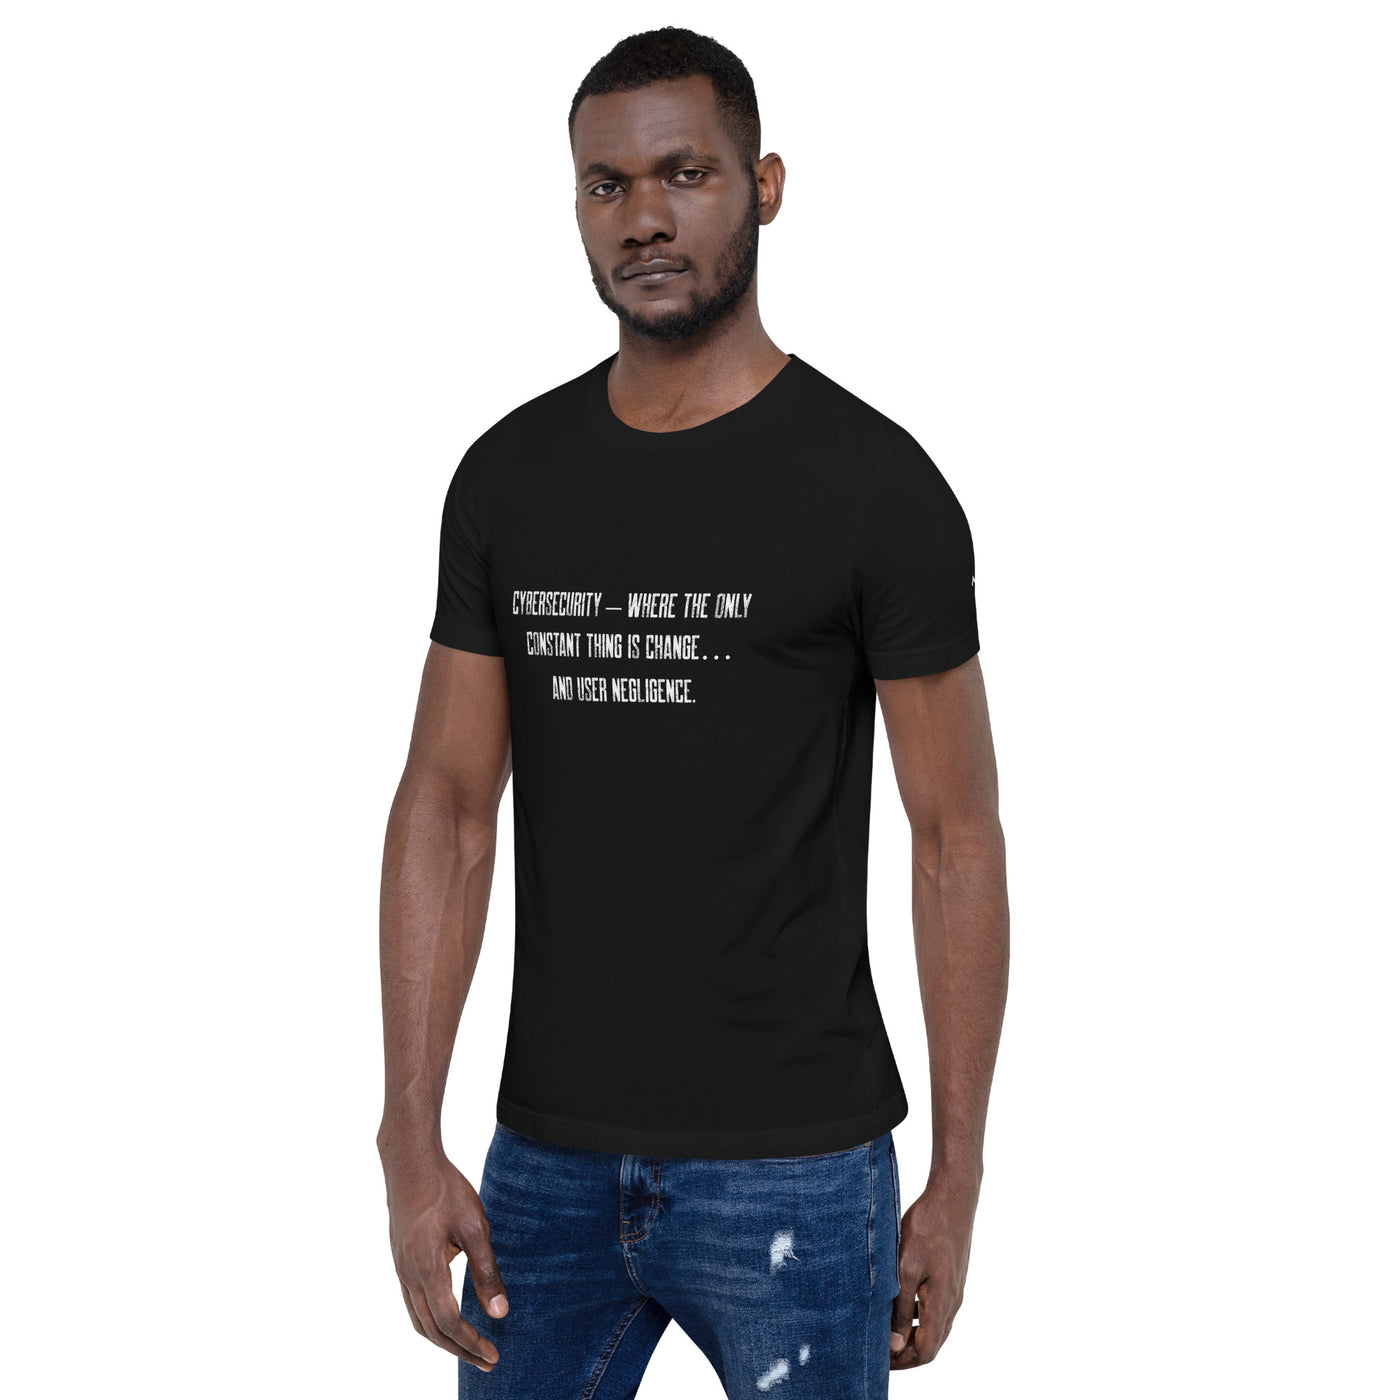 Cybersecurity where the only constant thing is change and user negligence - Unisex t-shirt